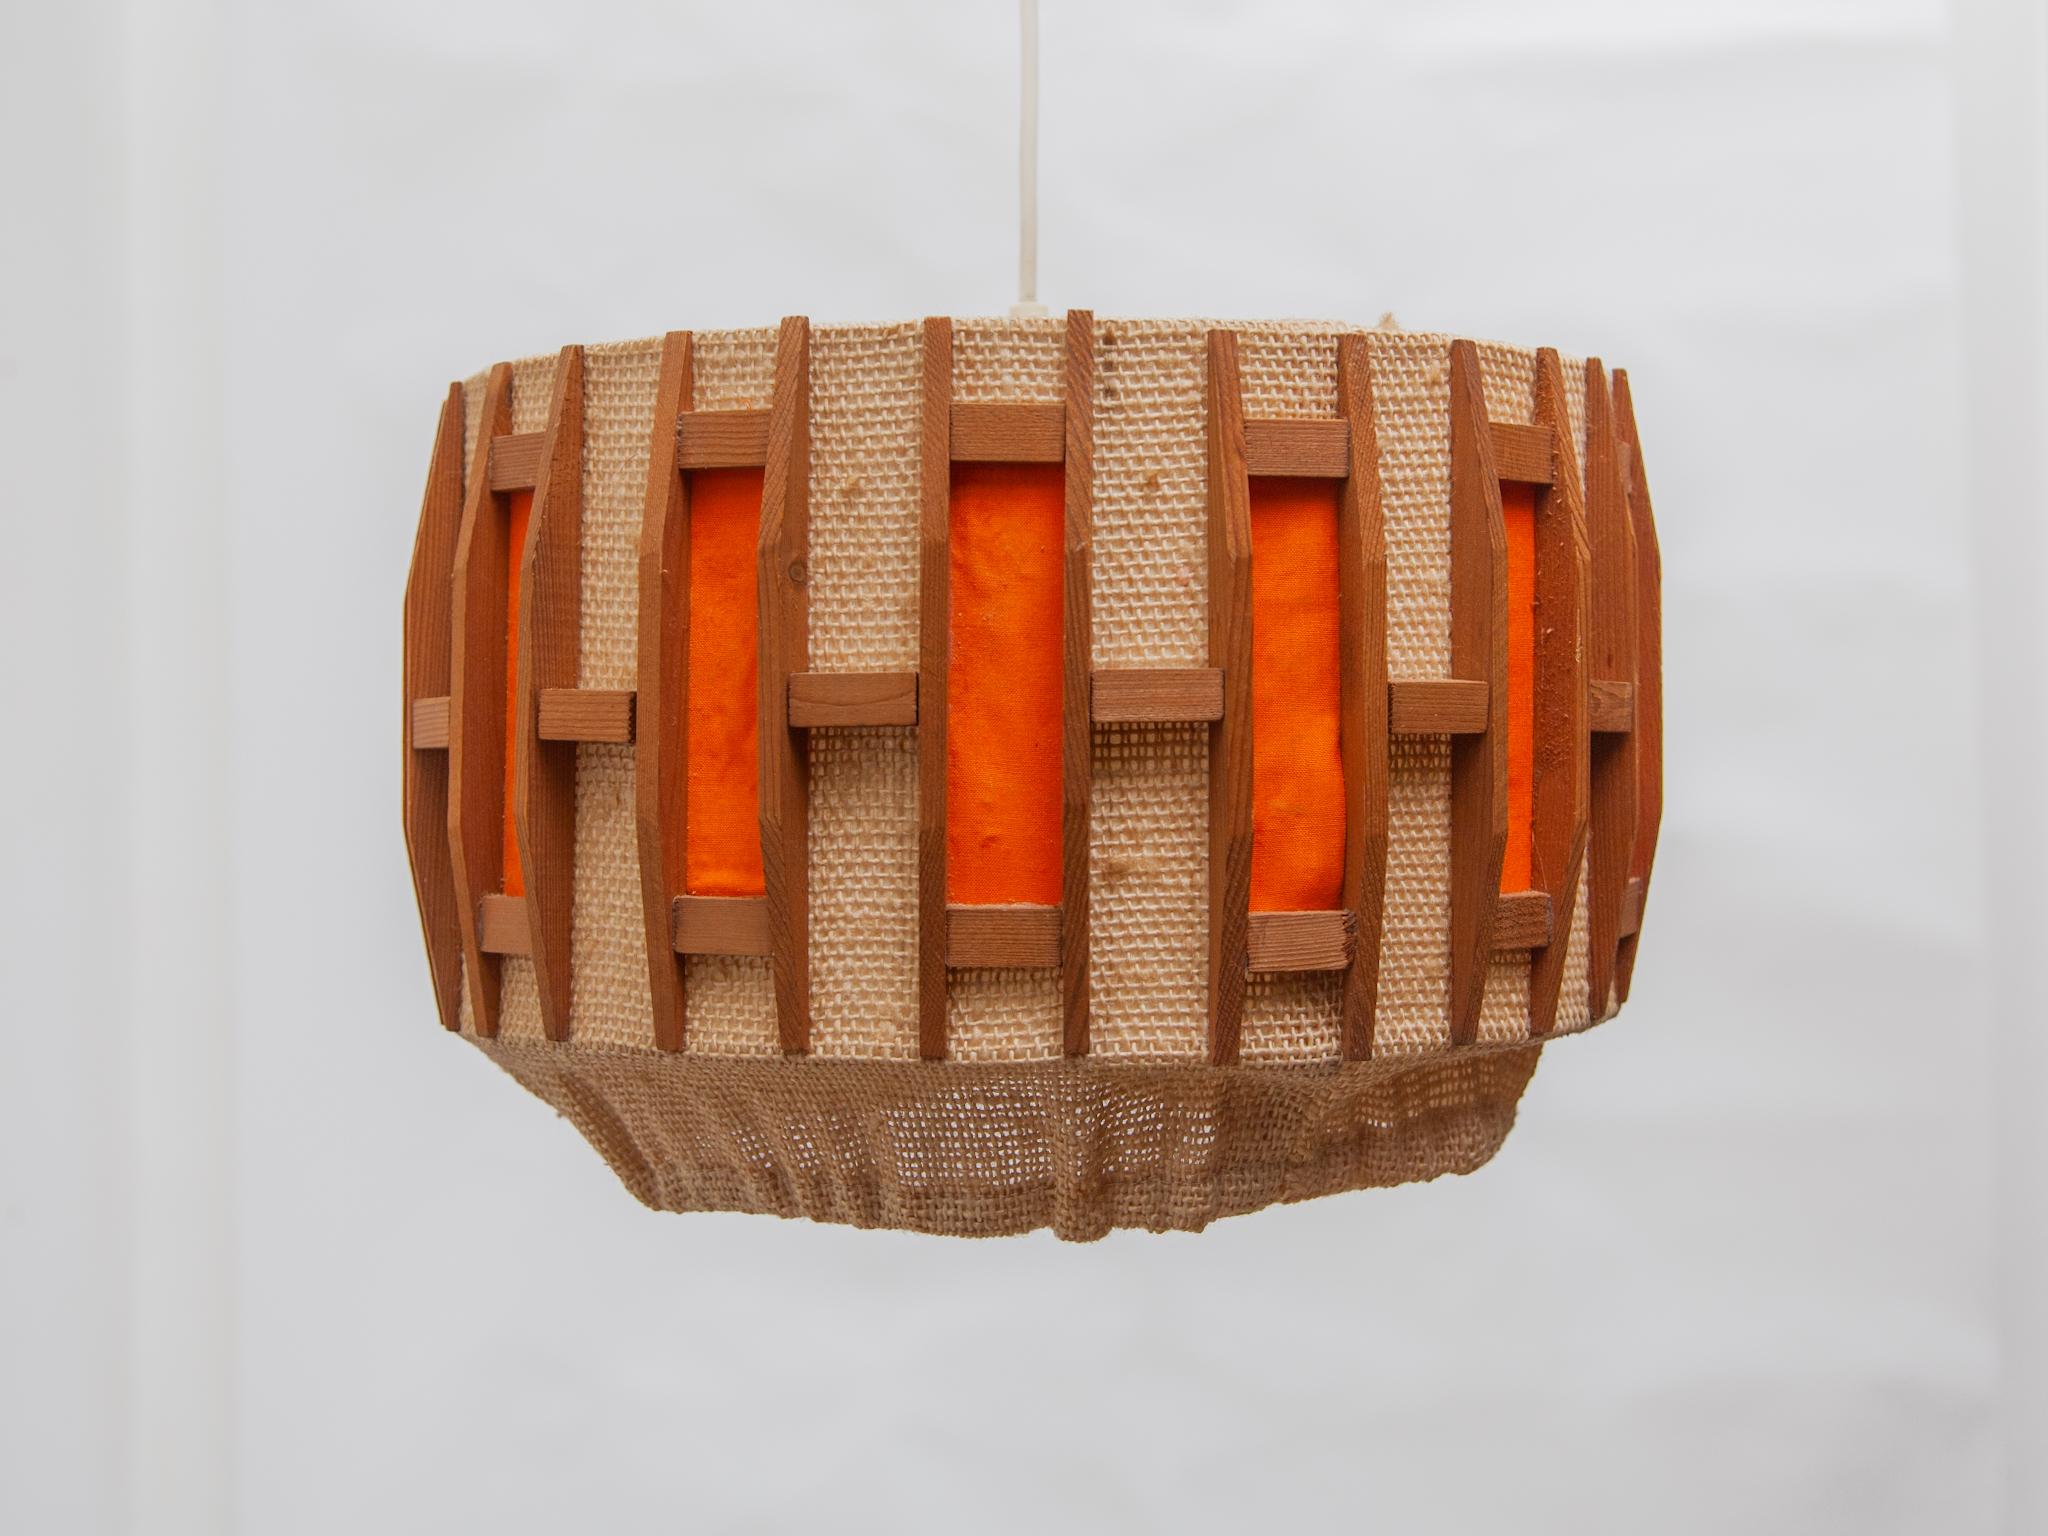 Vintage hanging lamp from the 60s. The round shade is made of teak and jute with orange accents designed by Massive, Belgium 1960s. A beautiful light and atmospheric light accent in your interior.
